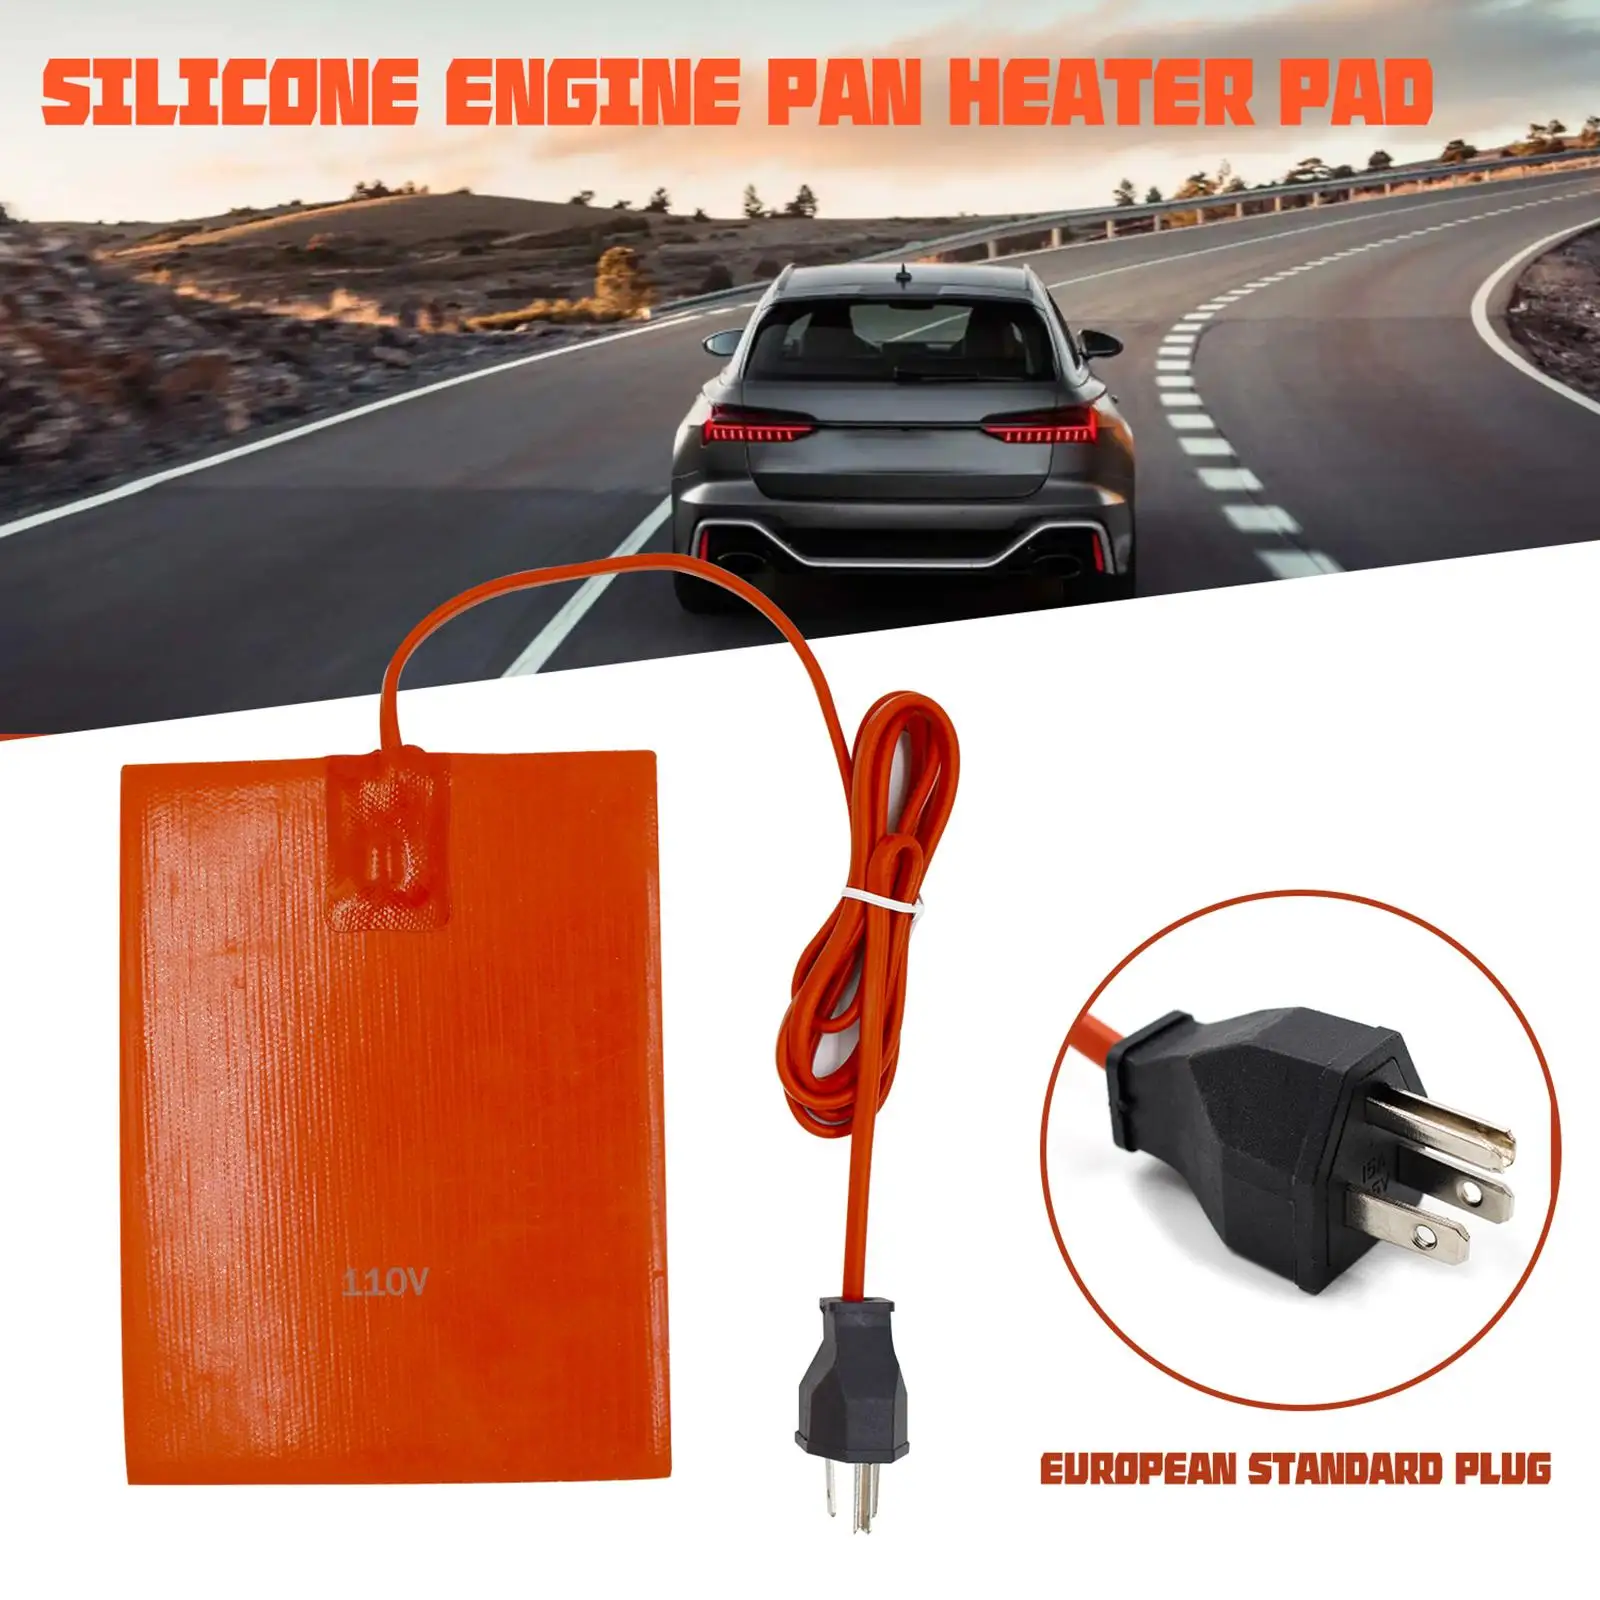 

Electric Car Engine Oil Pan Sump Tank Heater Plate 15x20cm Waterproof Universal Silicone Heating Pad Cord 110V US